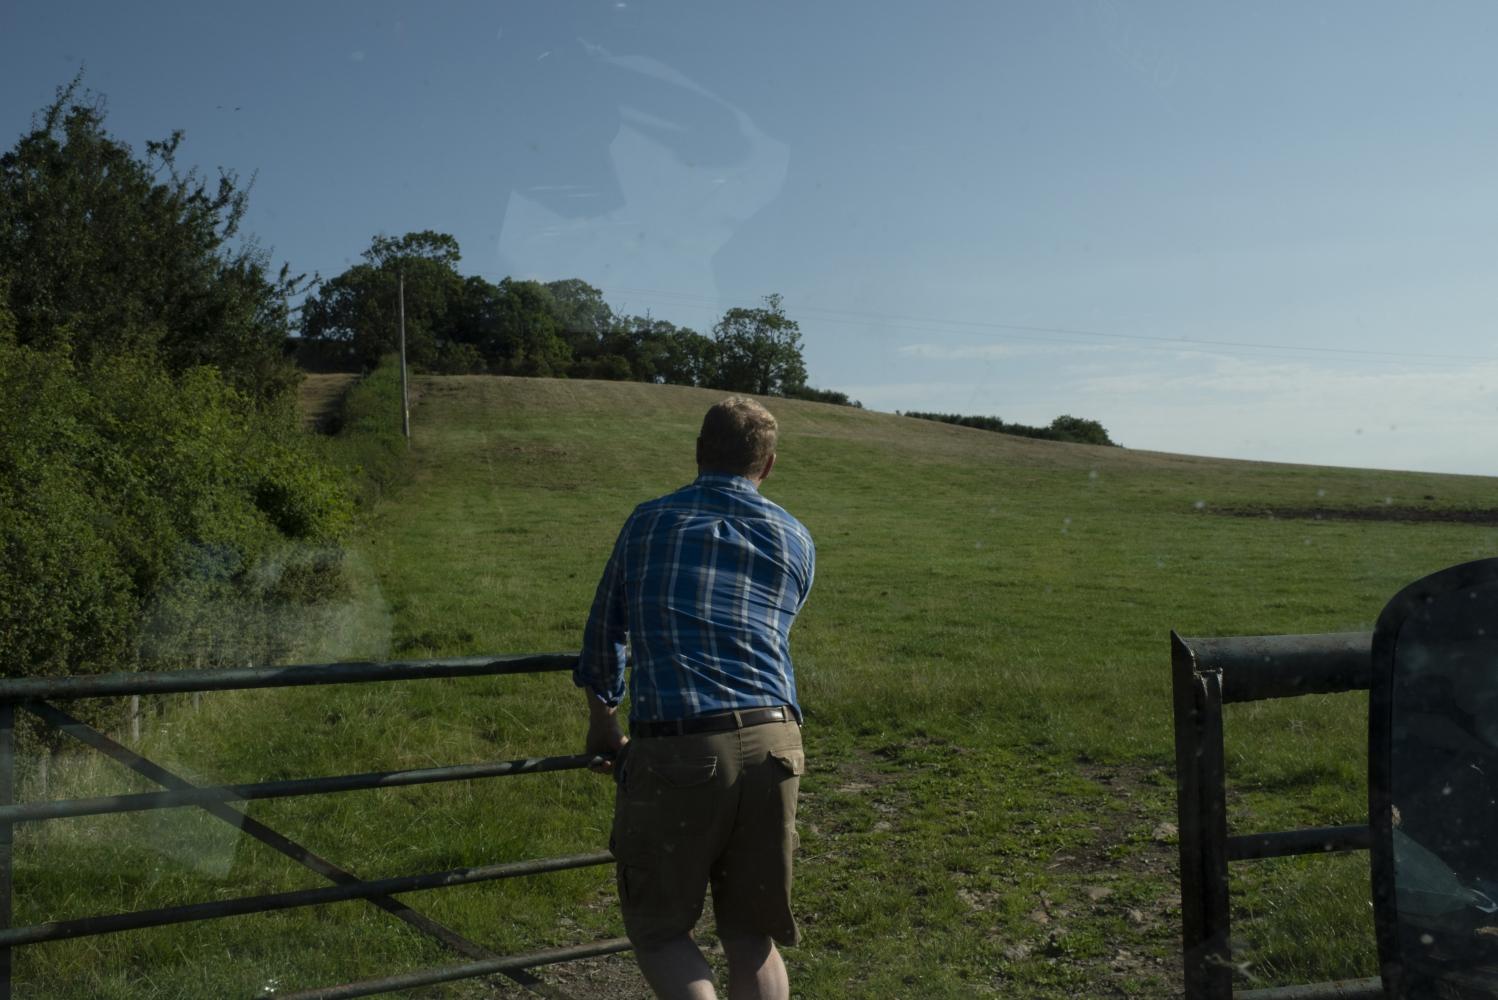 A man opening a gate into a field